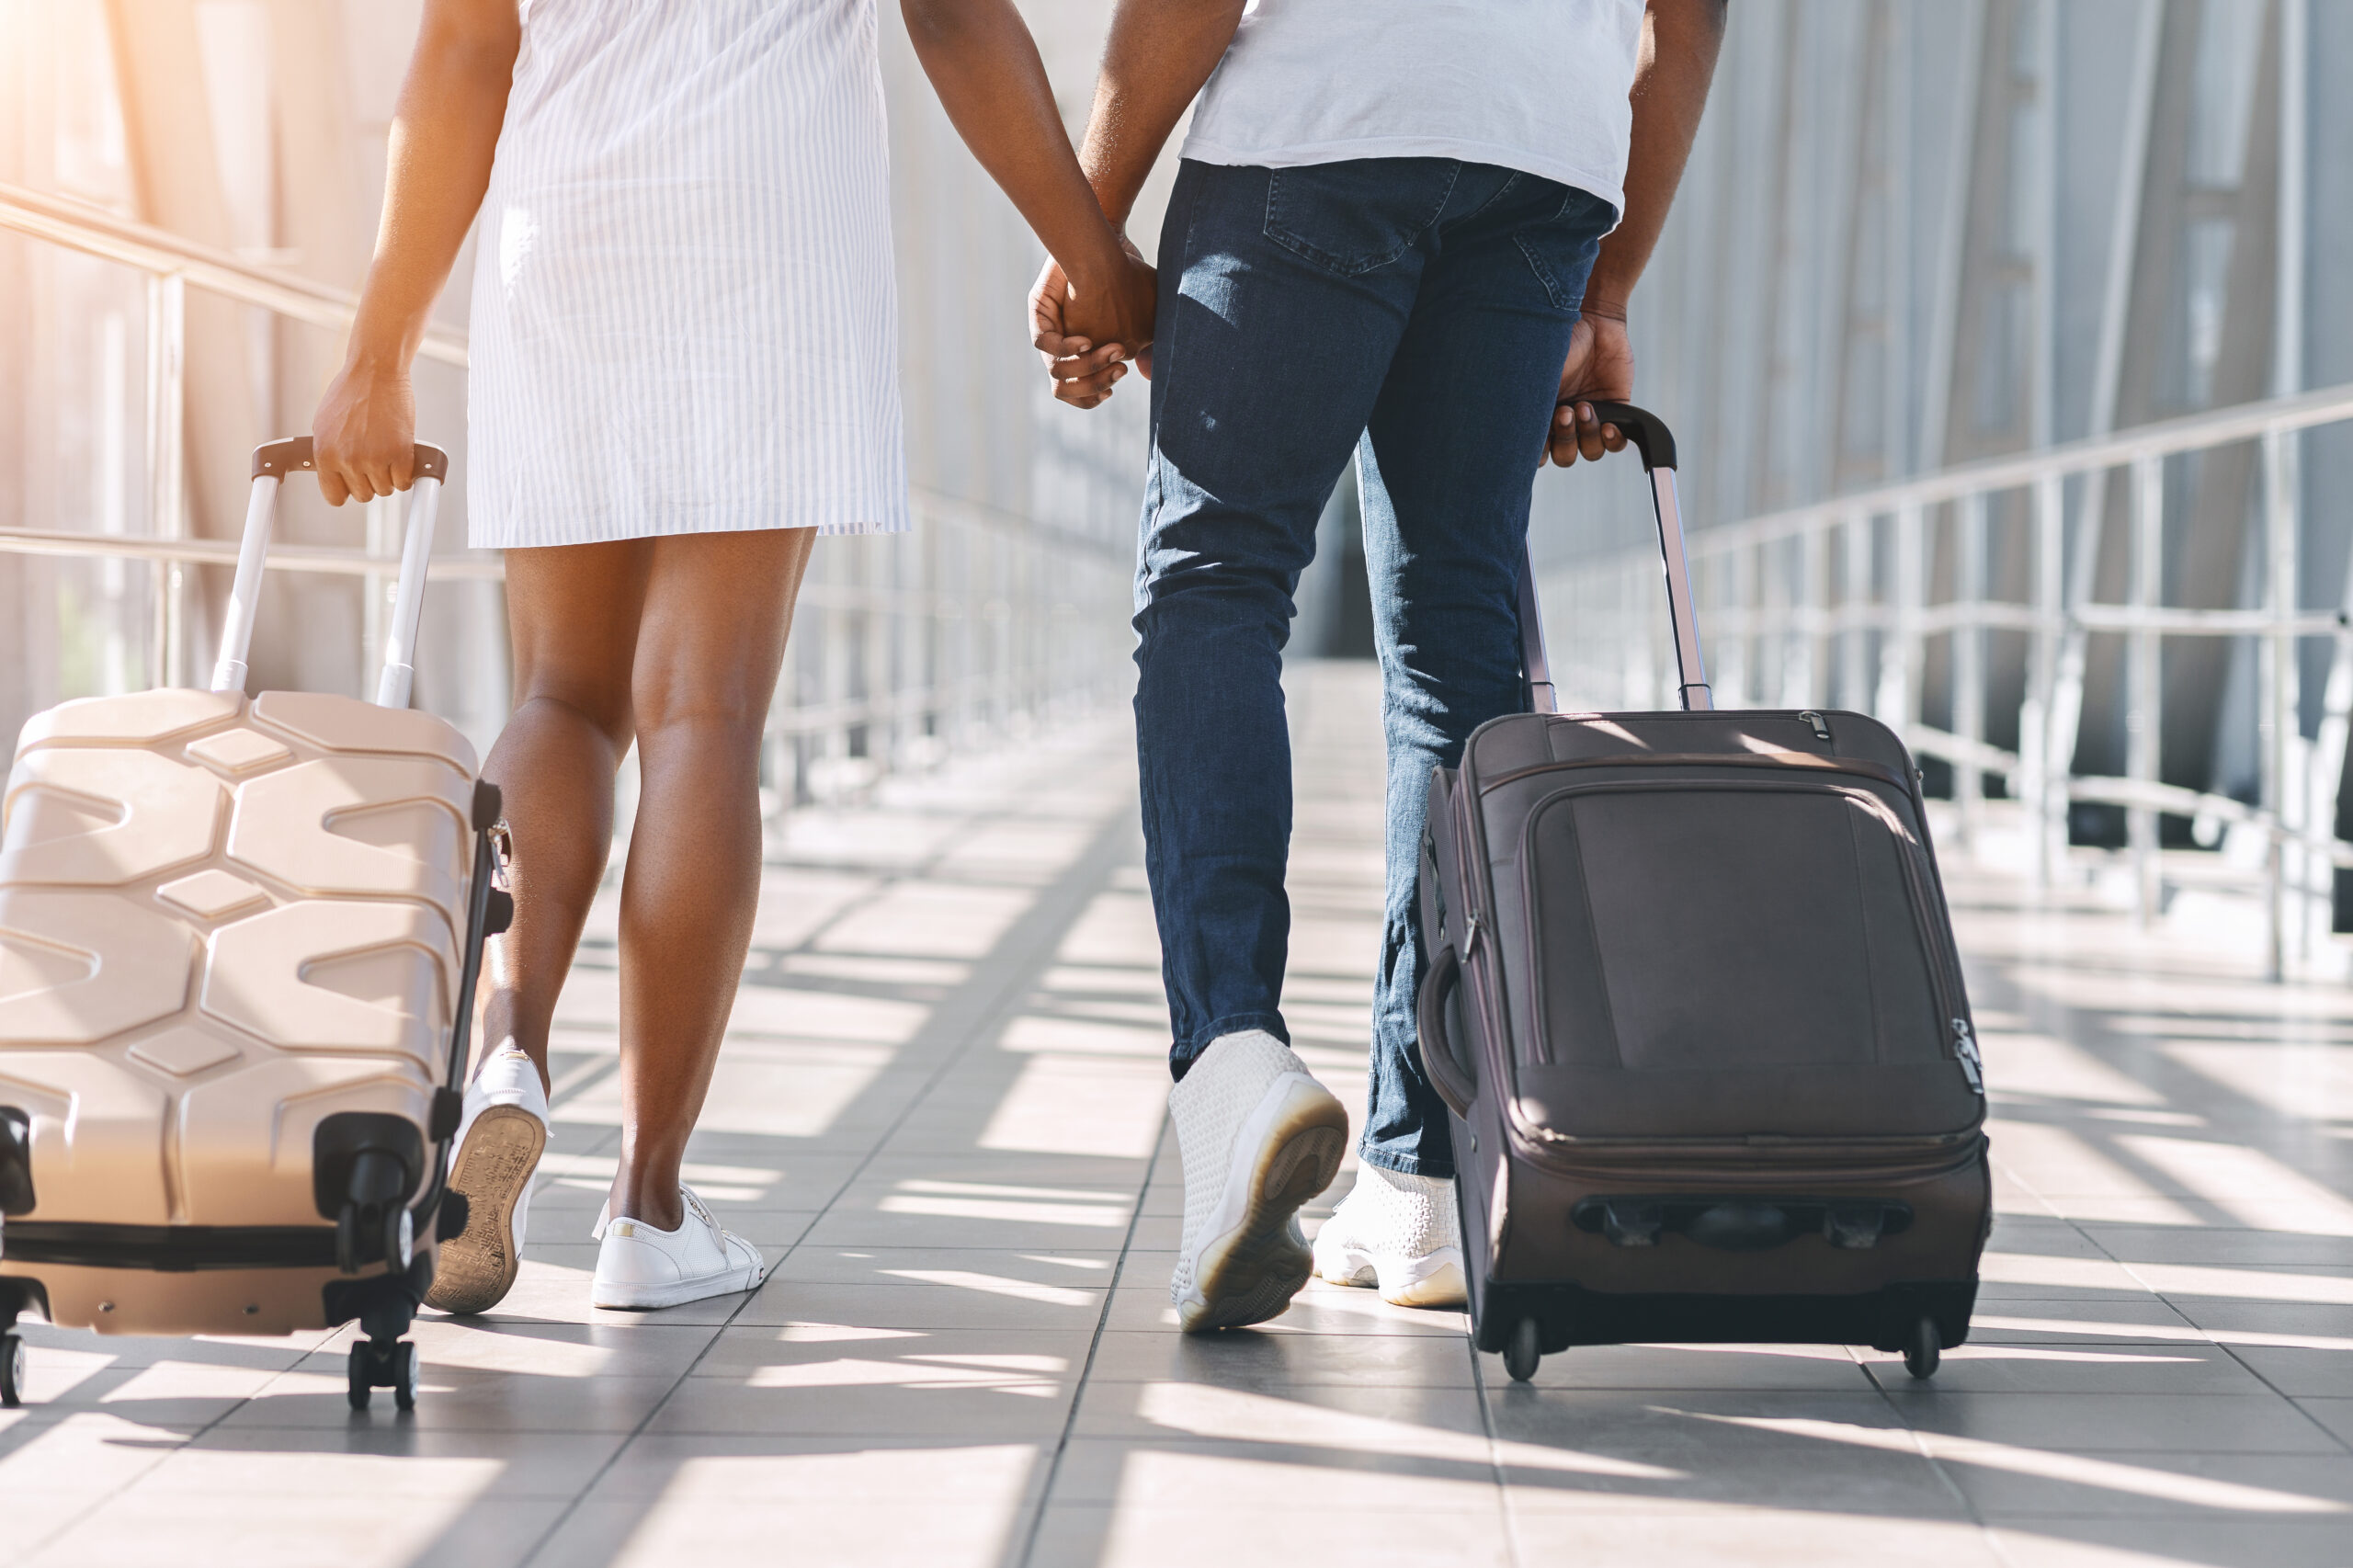 Black millennial couple walking with luggage at airport building.